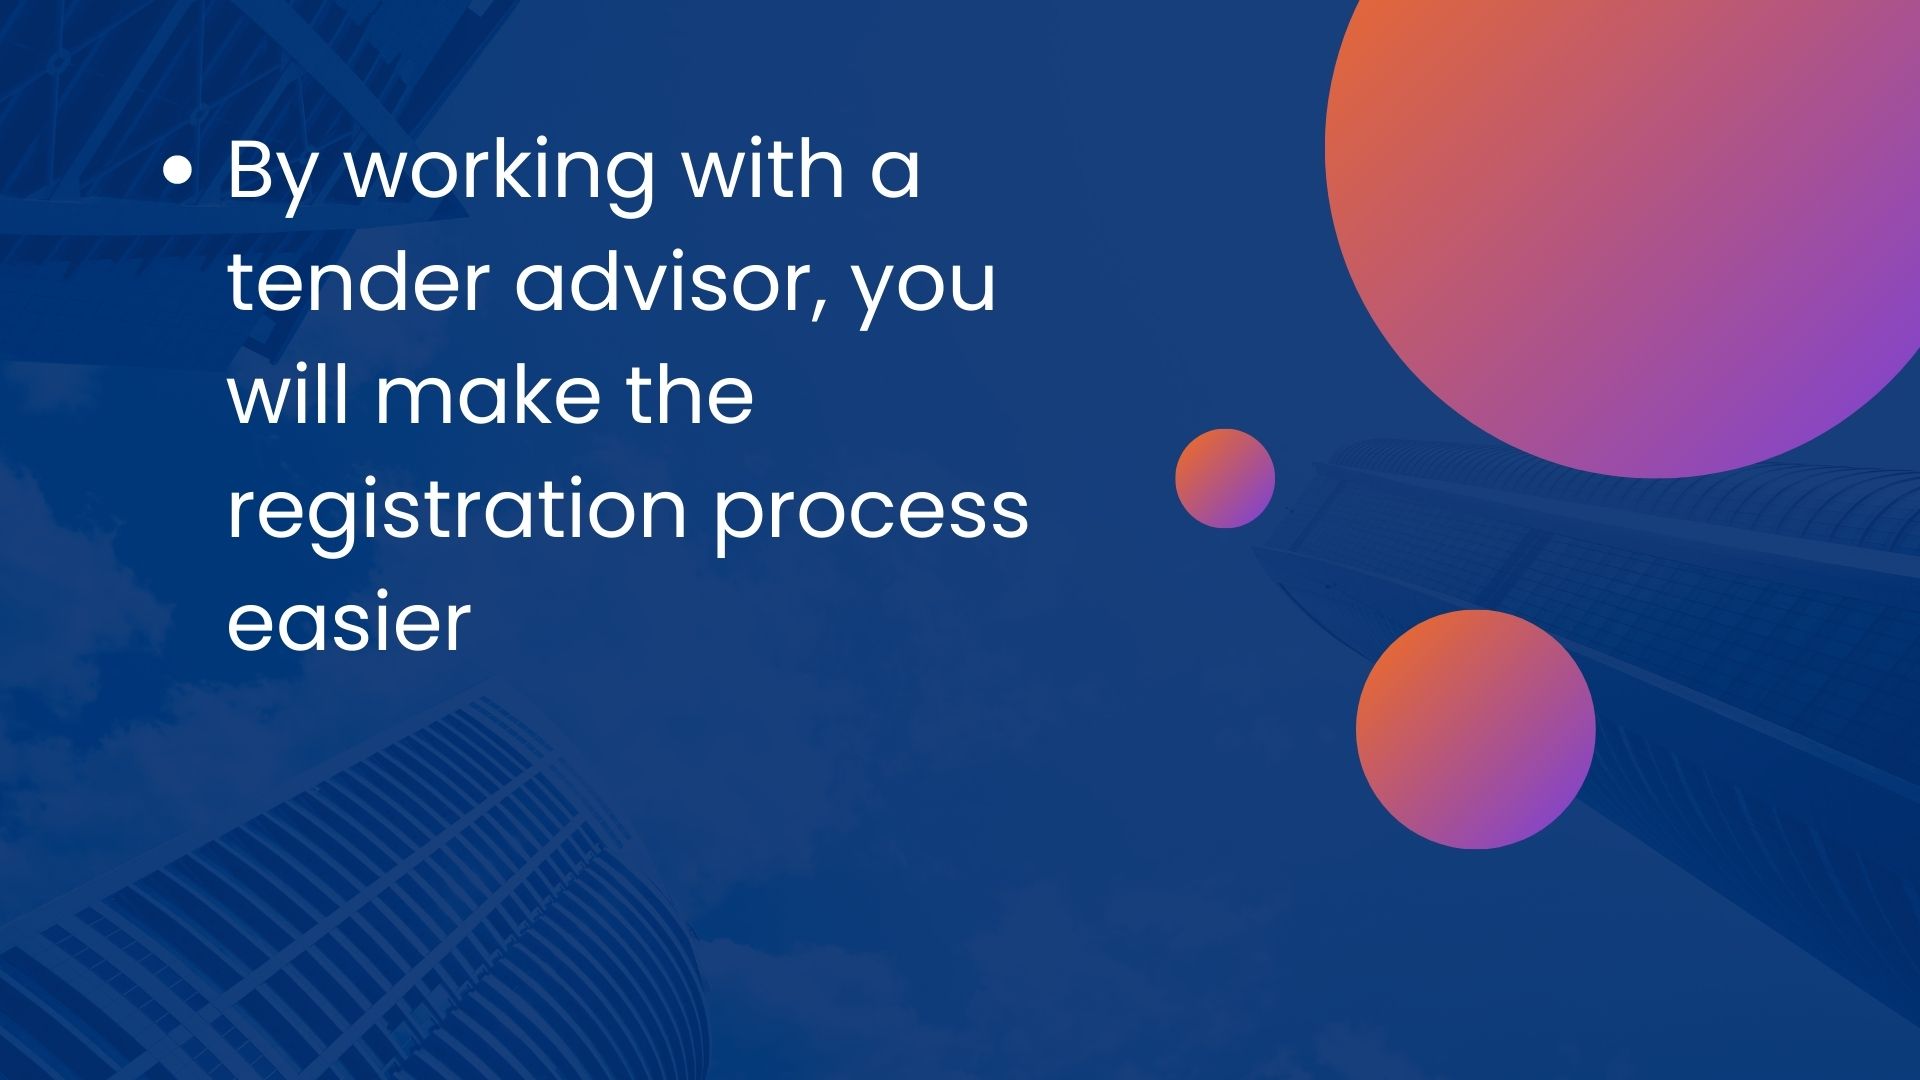 By working with a tender advisor, you will make the registration process easier